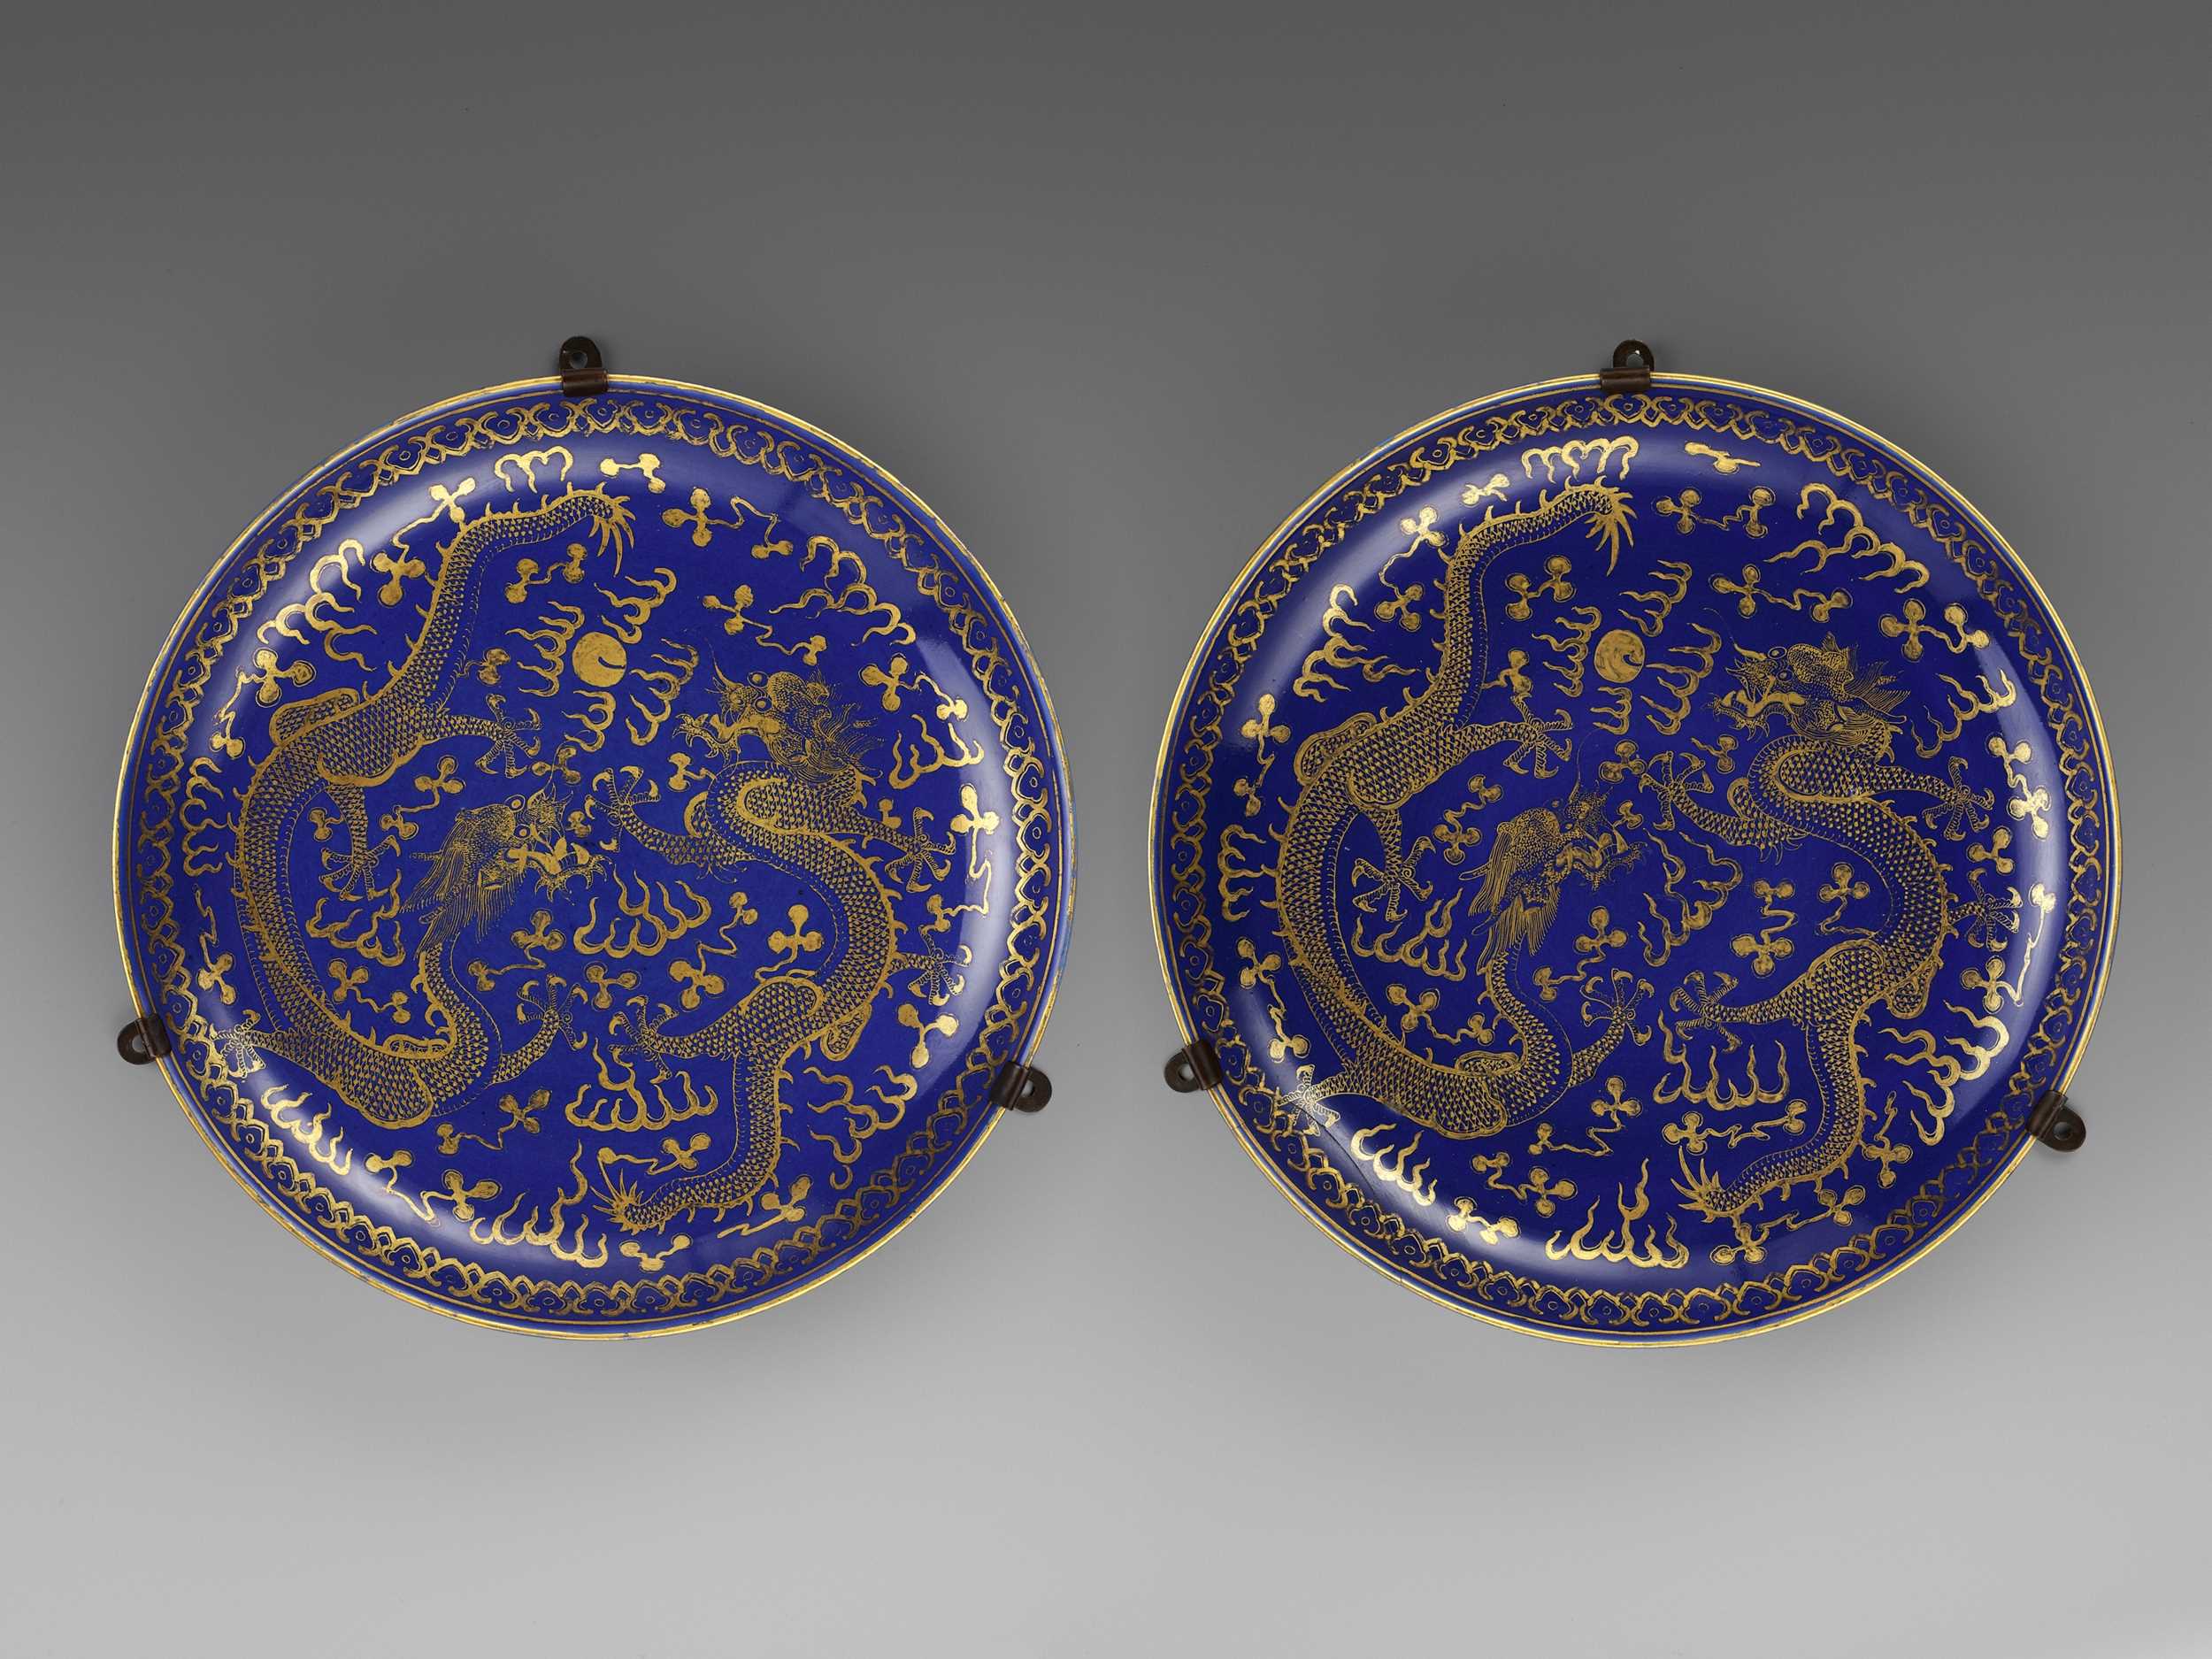 Lot 274 - A PAIR OF POWDER-BLUE-GLAZED GILT-DECORATED ‘DRAGON’ CHARGERS, GUANGXU MARKS AND OF THE PERIOD